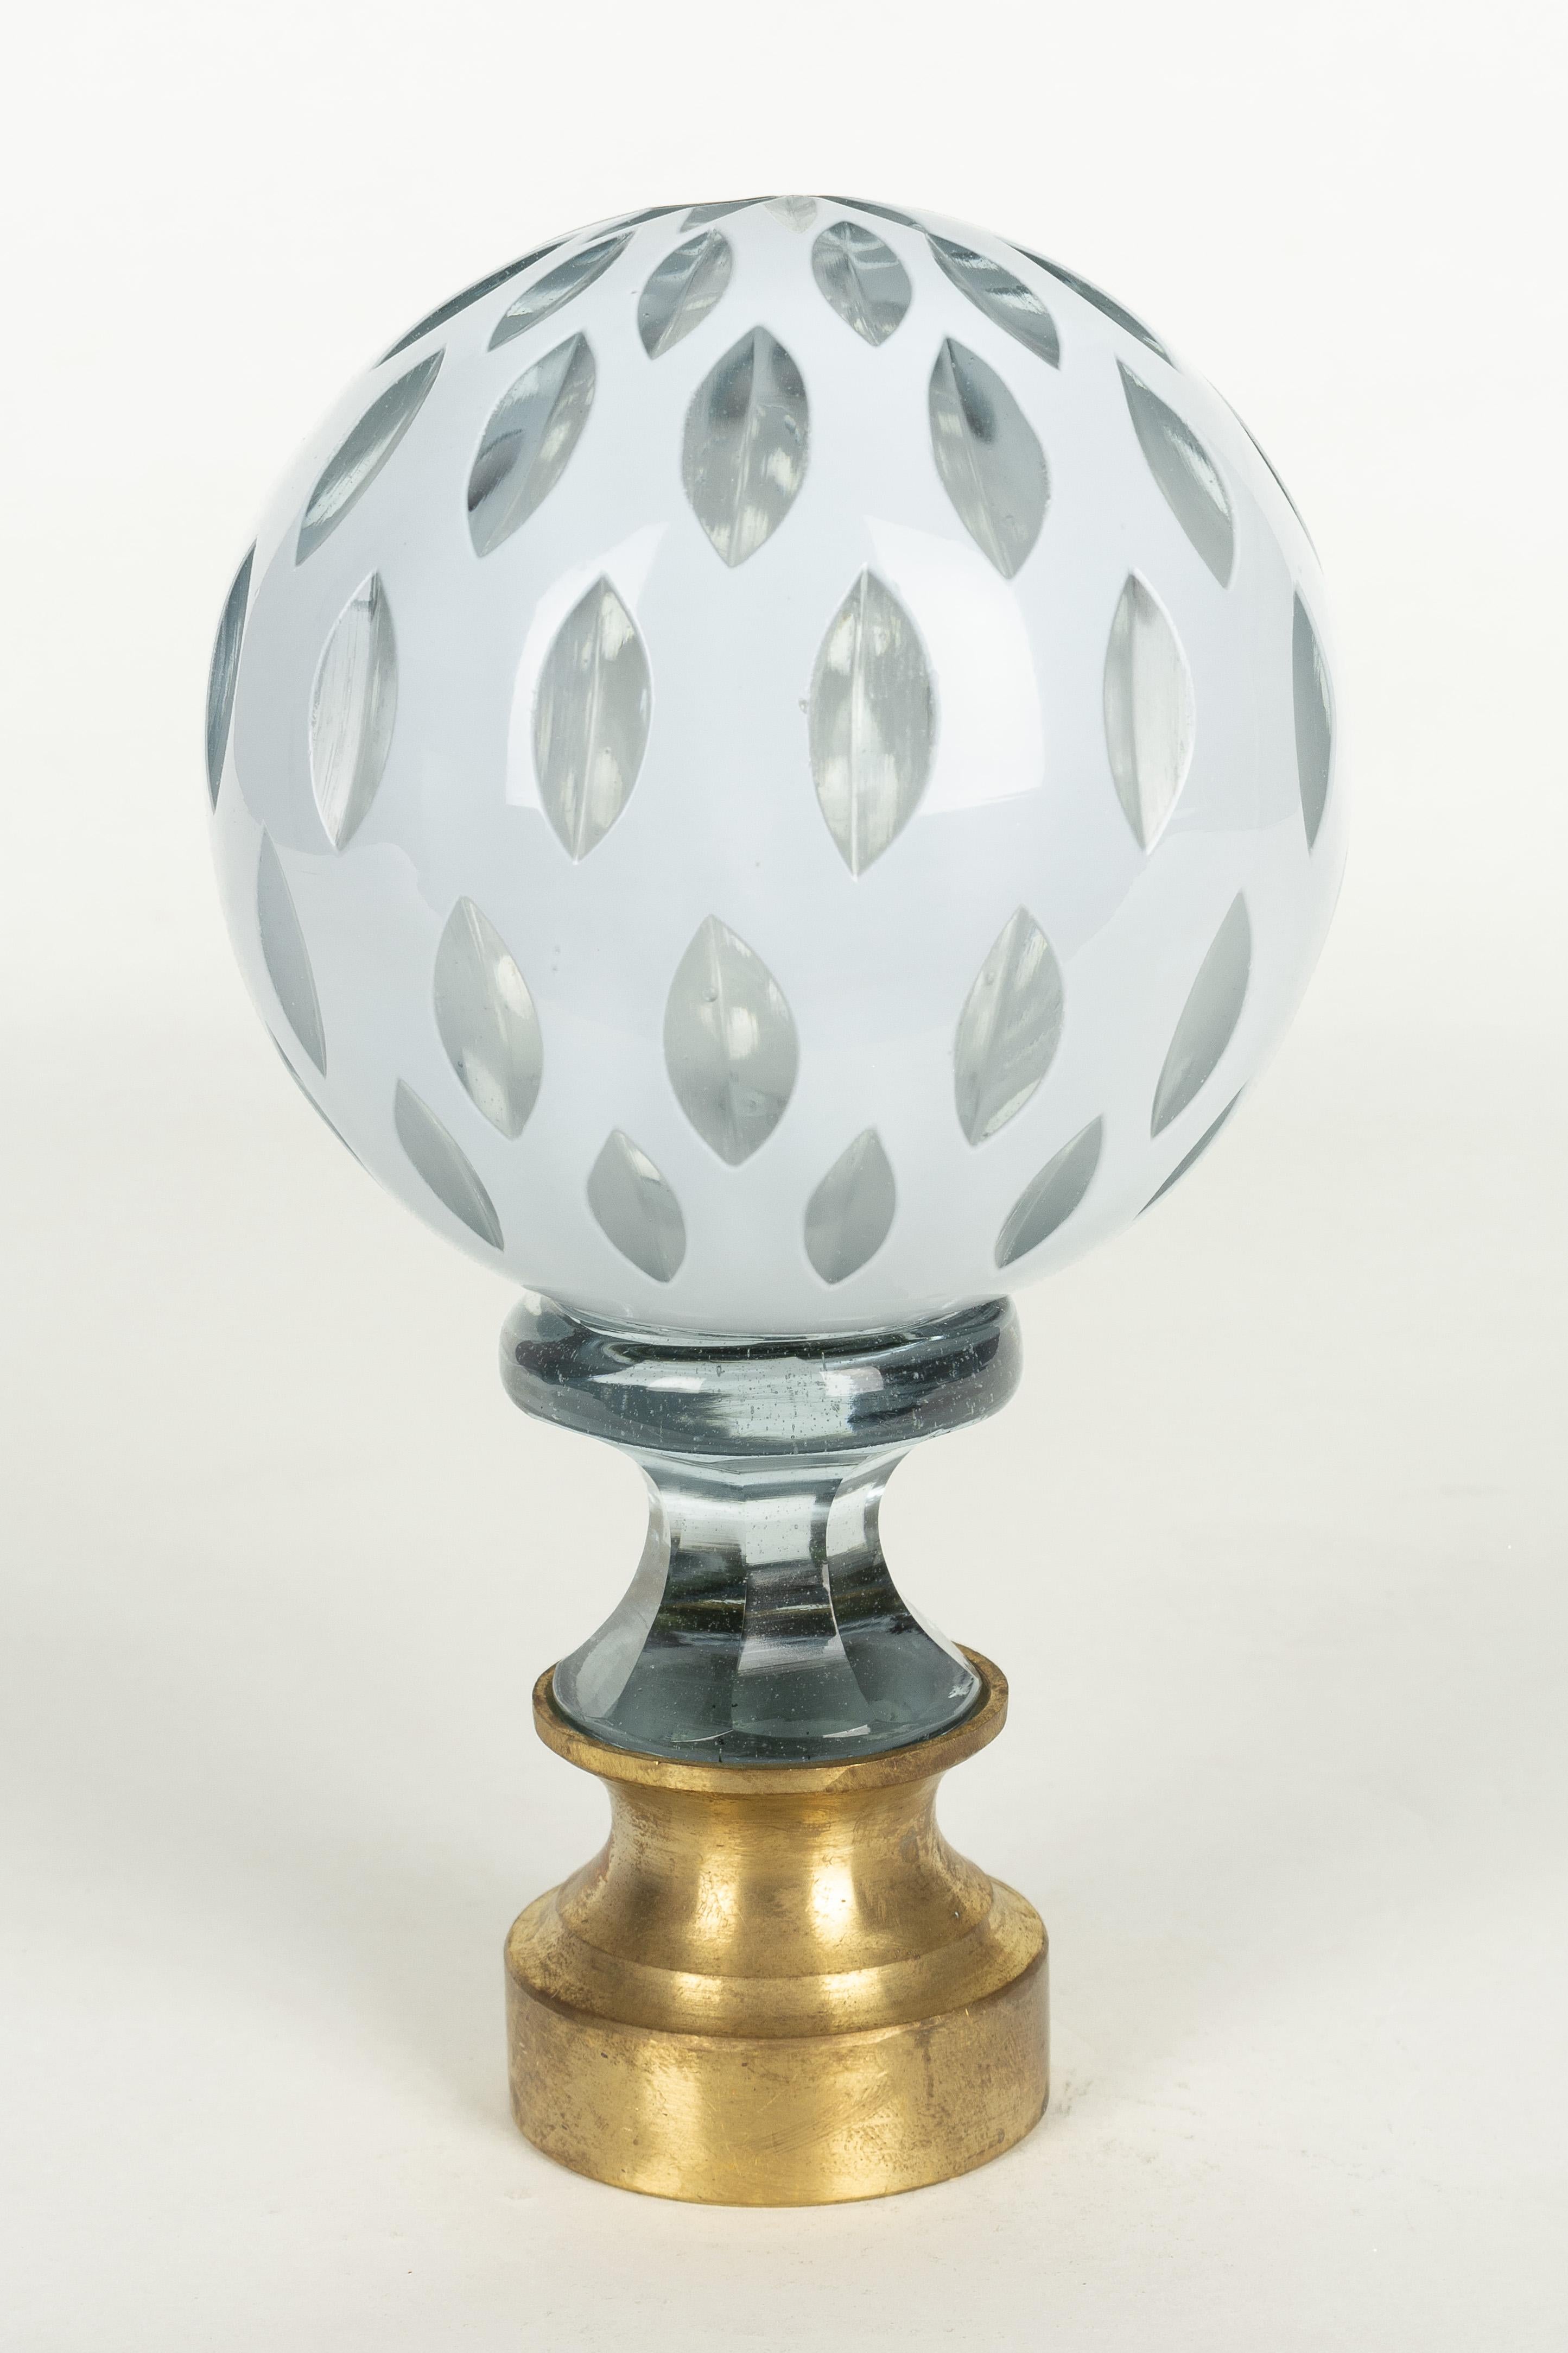 Cast French Crystal Glass Boule d'escalier or Newel Post Finial